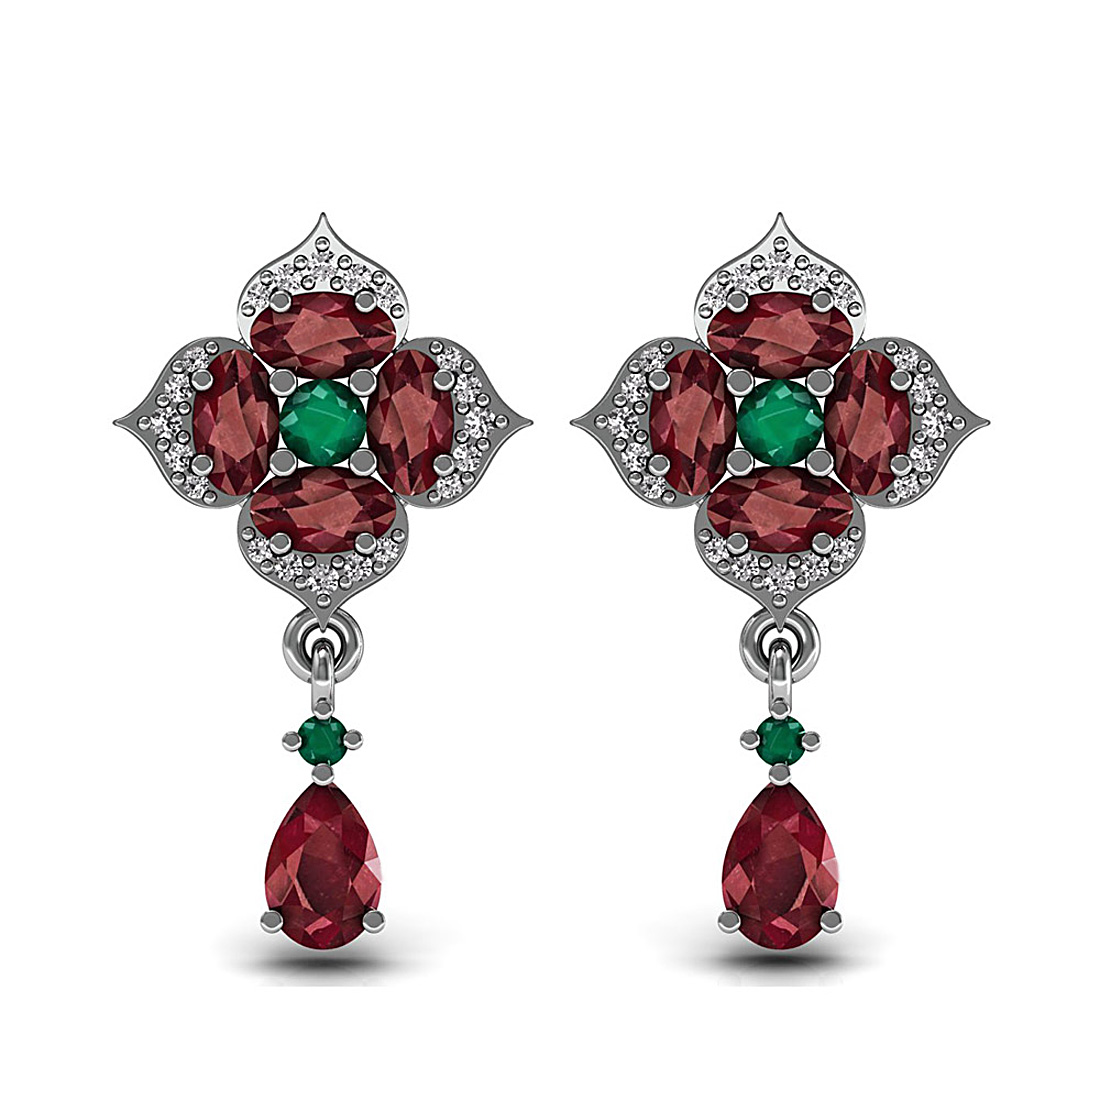 Diamond dangle drop earrings adorned with natural emerald and ruby gemstone made in 18k solid white gold.